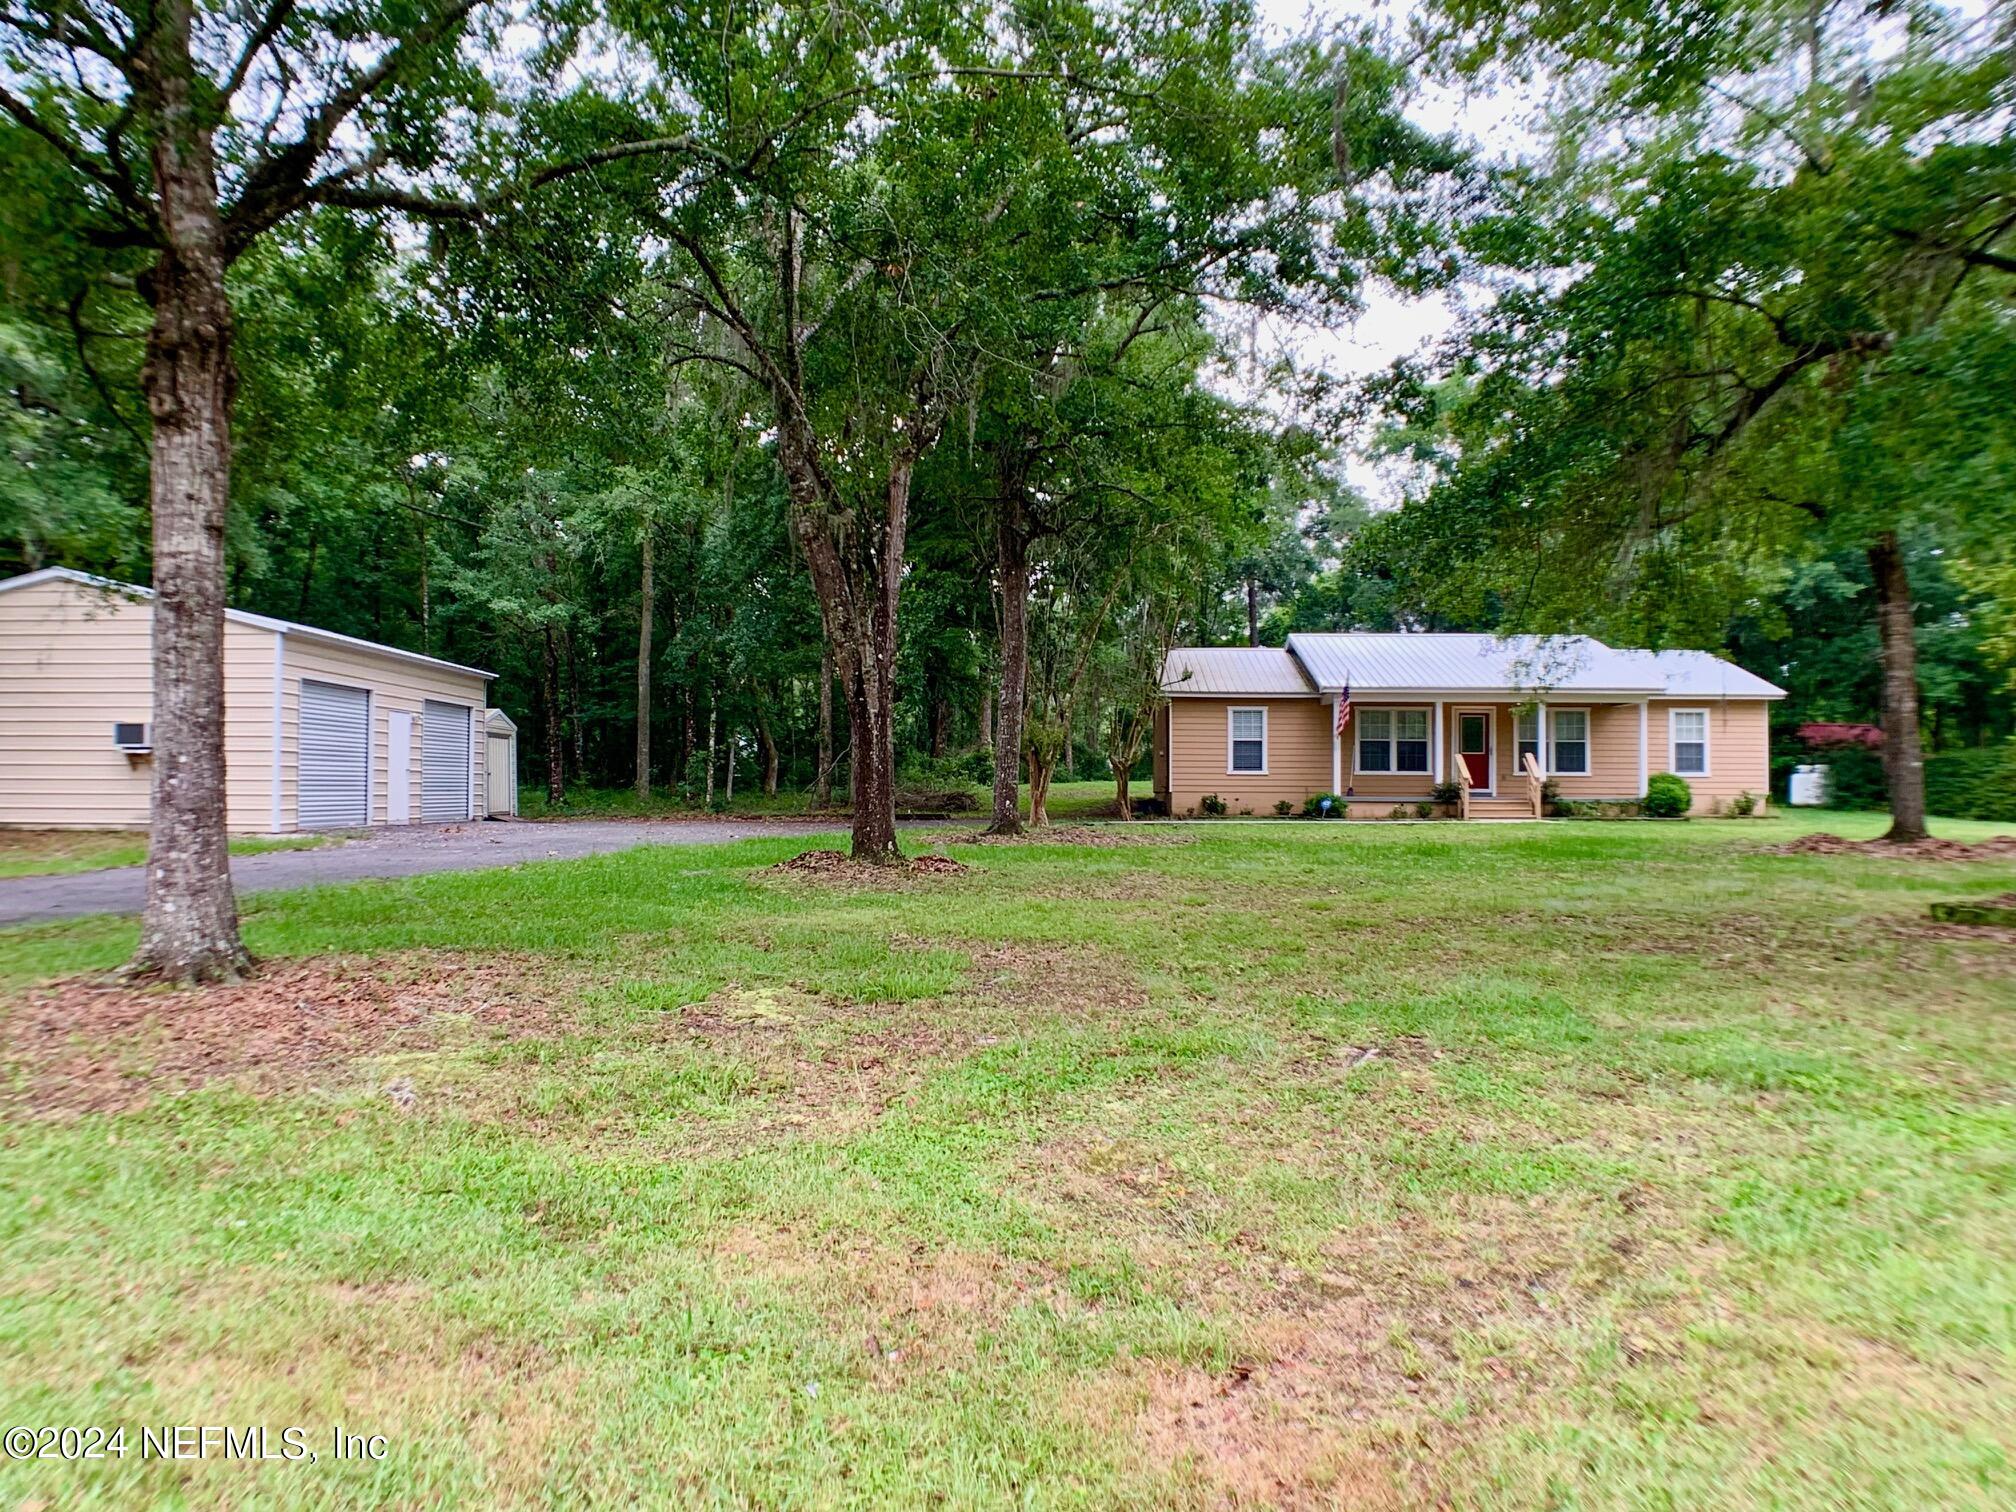 Middleburg, FL home for sale located at 4315 Peppergrass Street, Middleburg, FL 32068